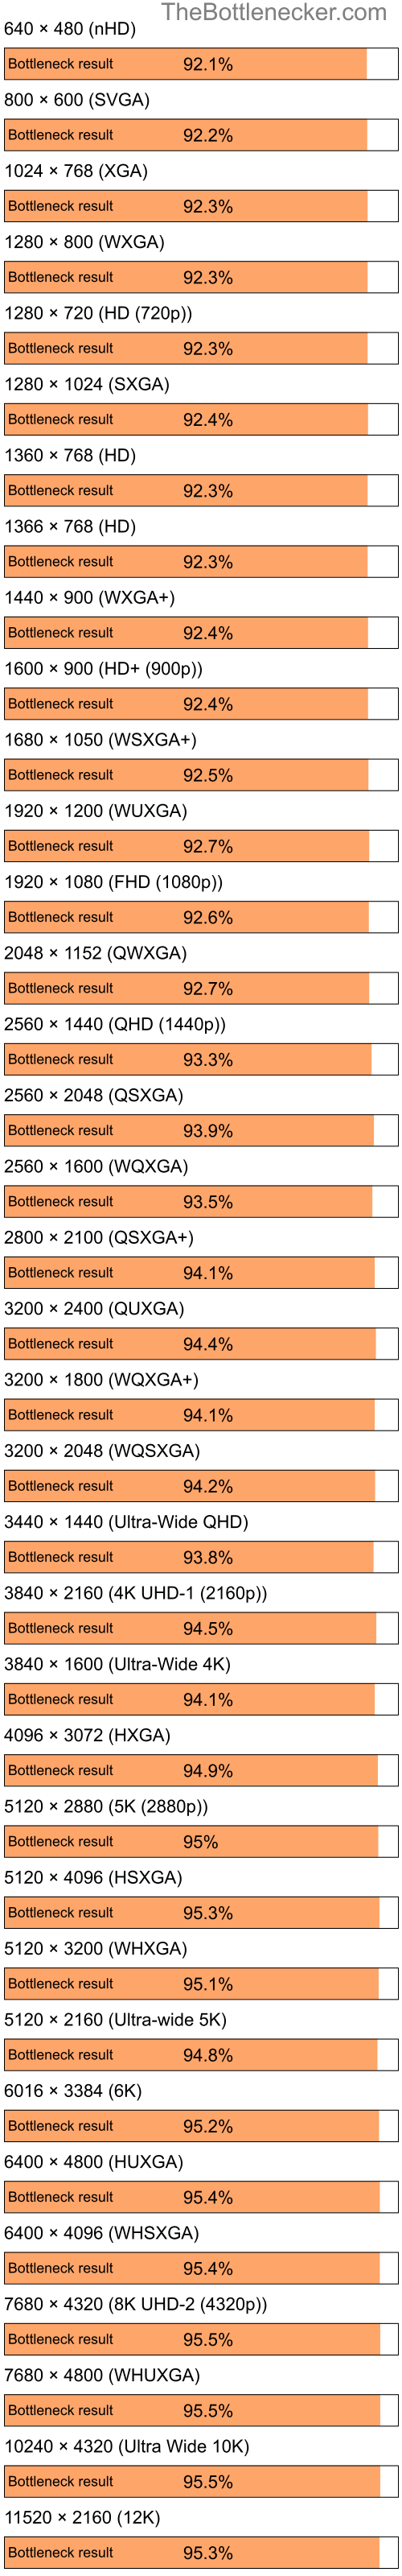 Bottleneck results by resolution for Intel Pentium 4 and AMD Mobility Radeon 9200 in7 Days to Die